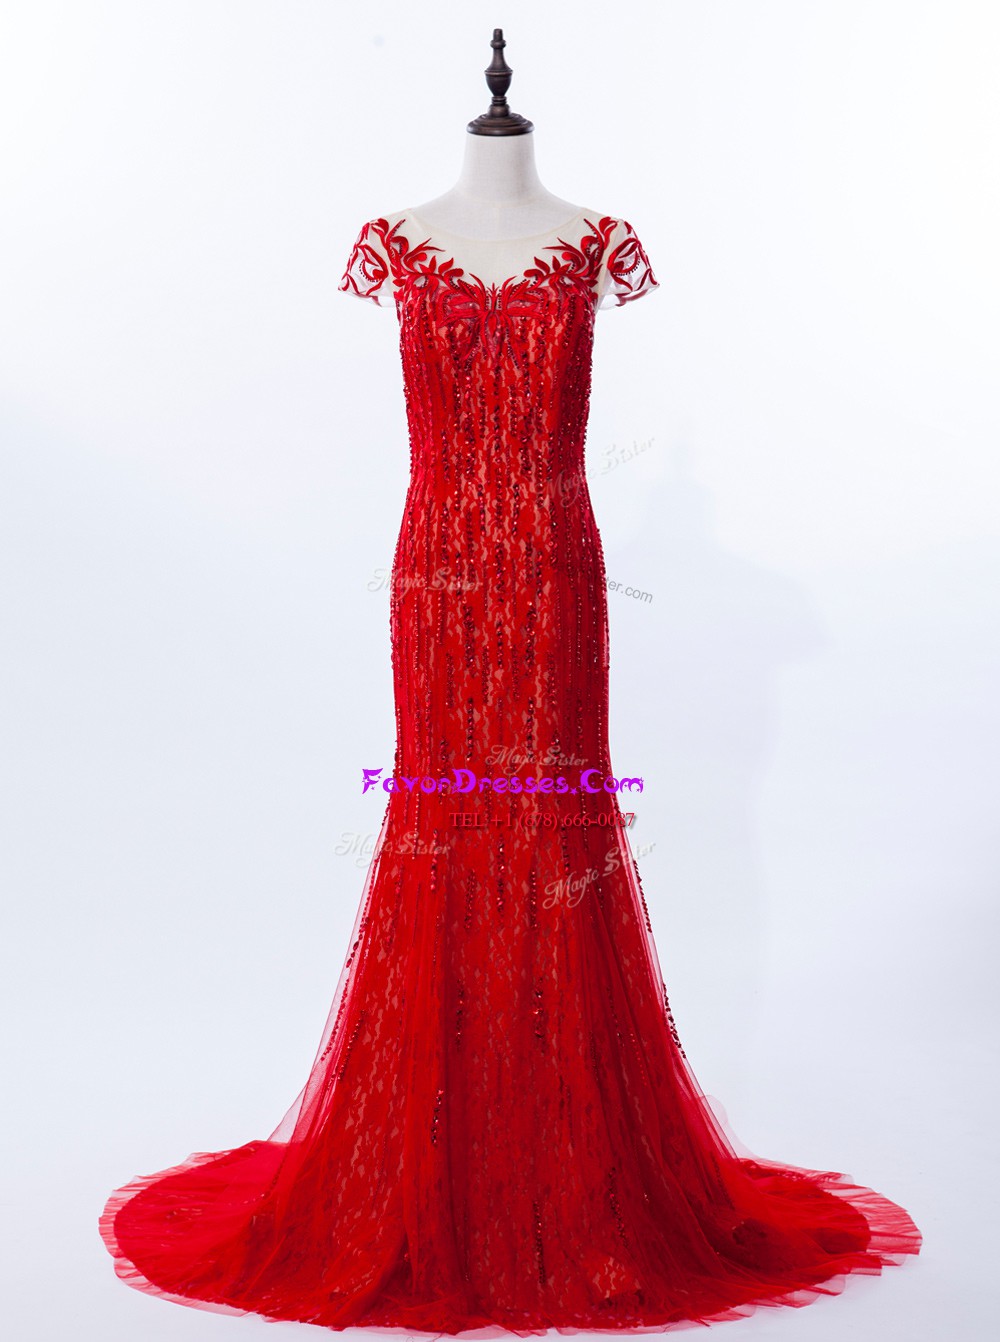 Beautiful Mermaid Lace Red Prom Party Dress Prom and Party and For with Beading and Appliques Scoop Cap Sleeves Brush Train Zipper